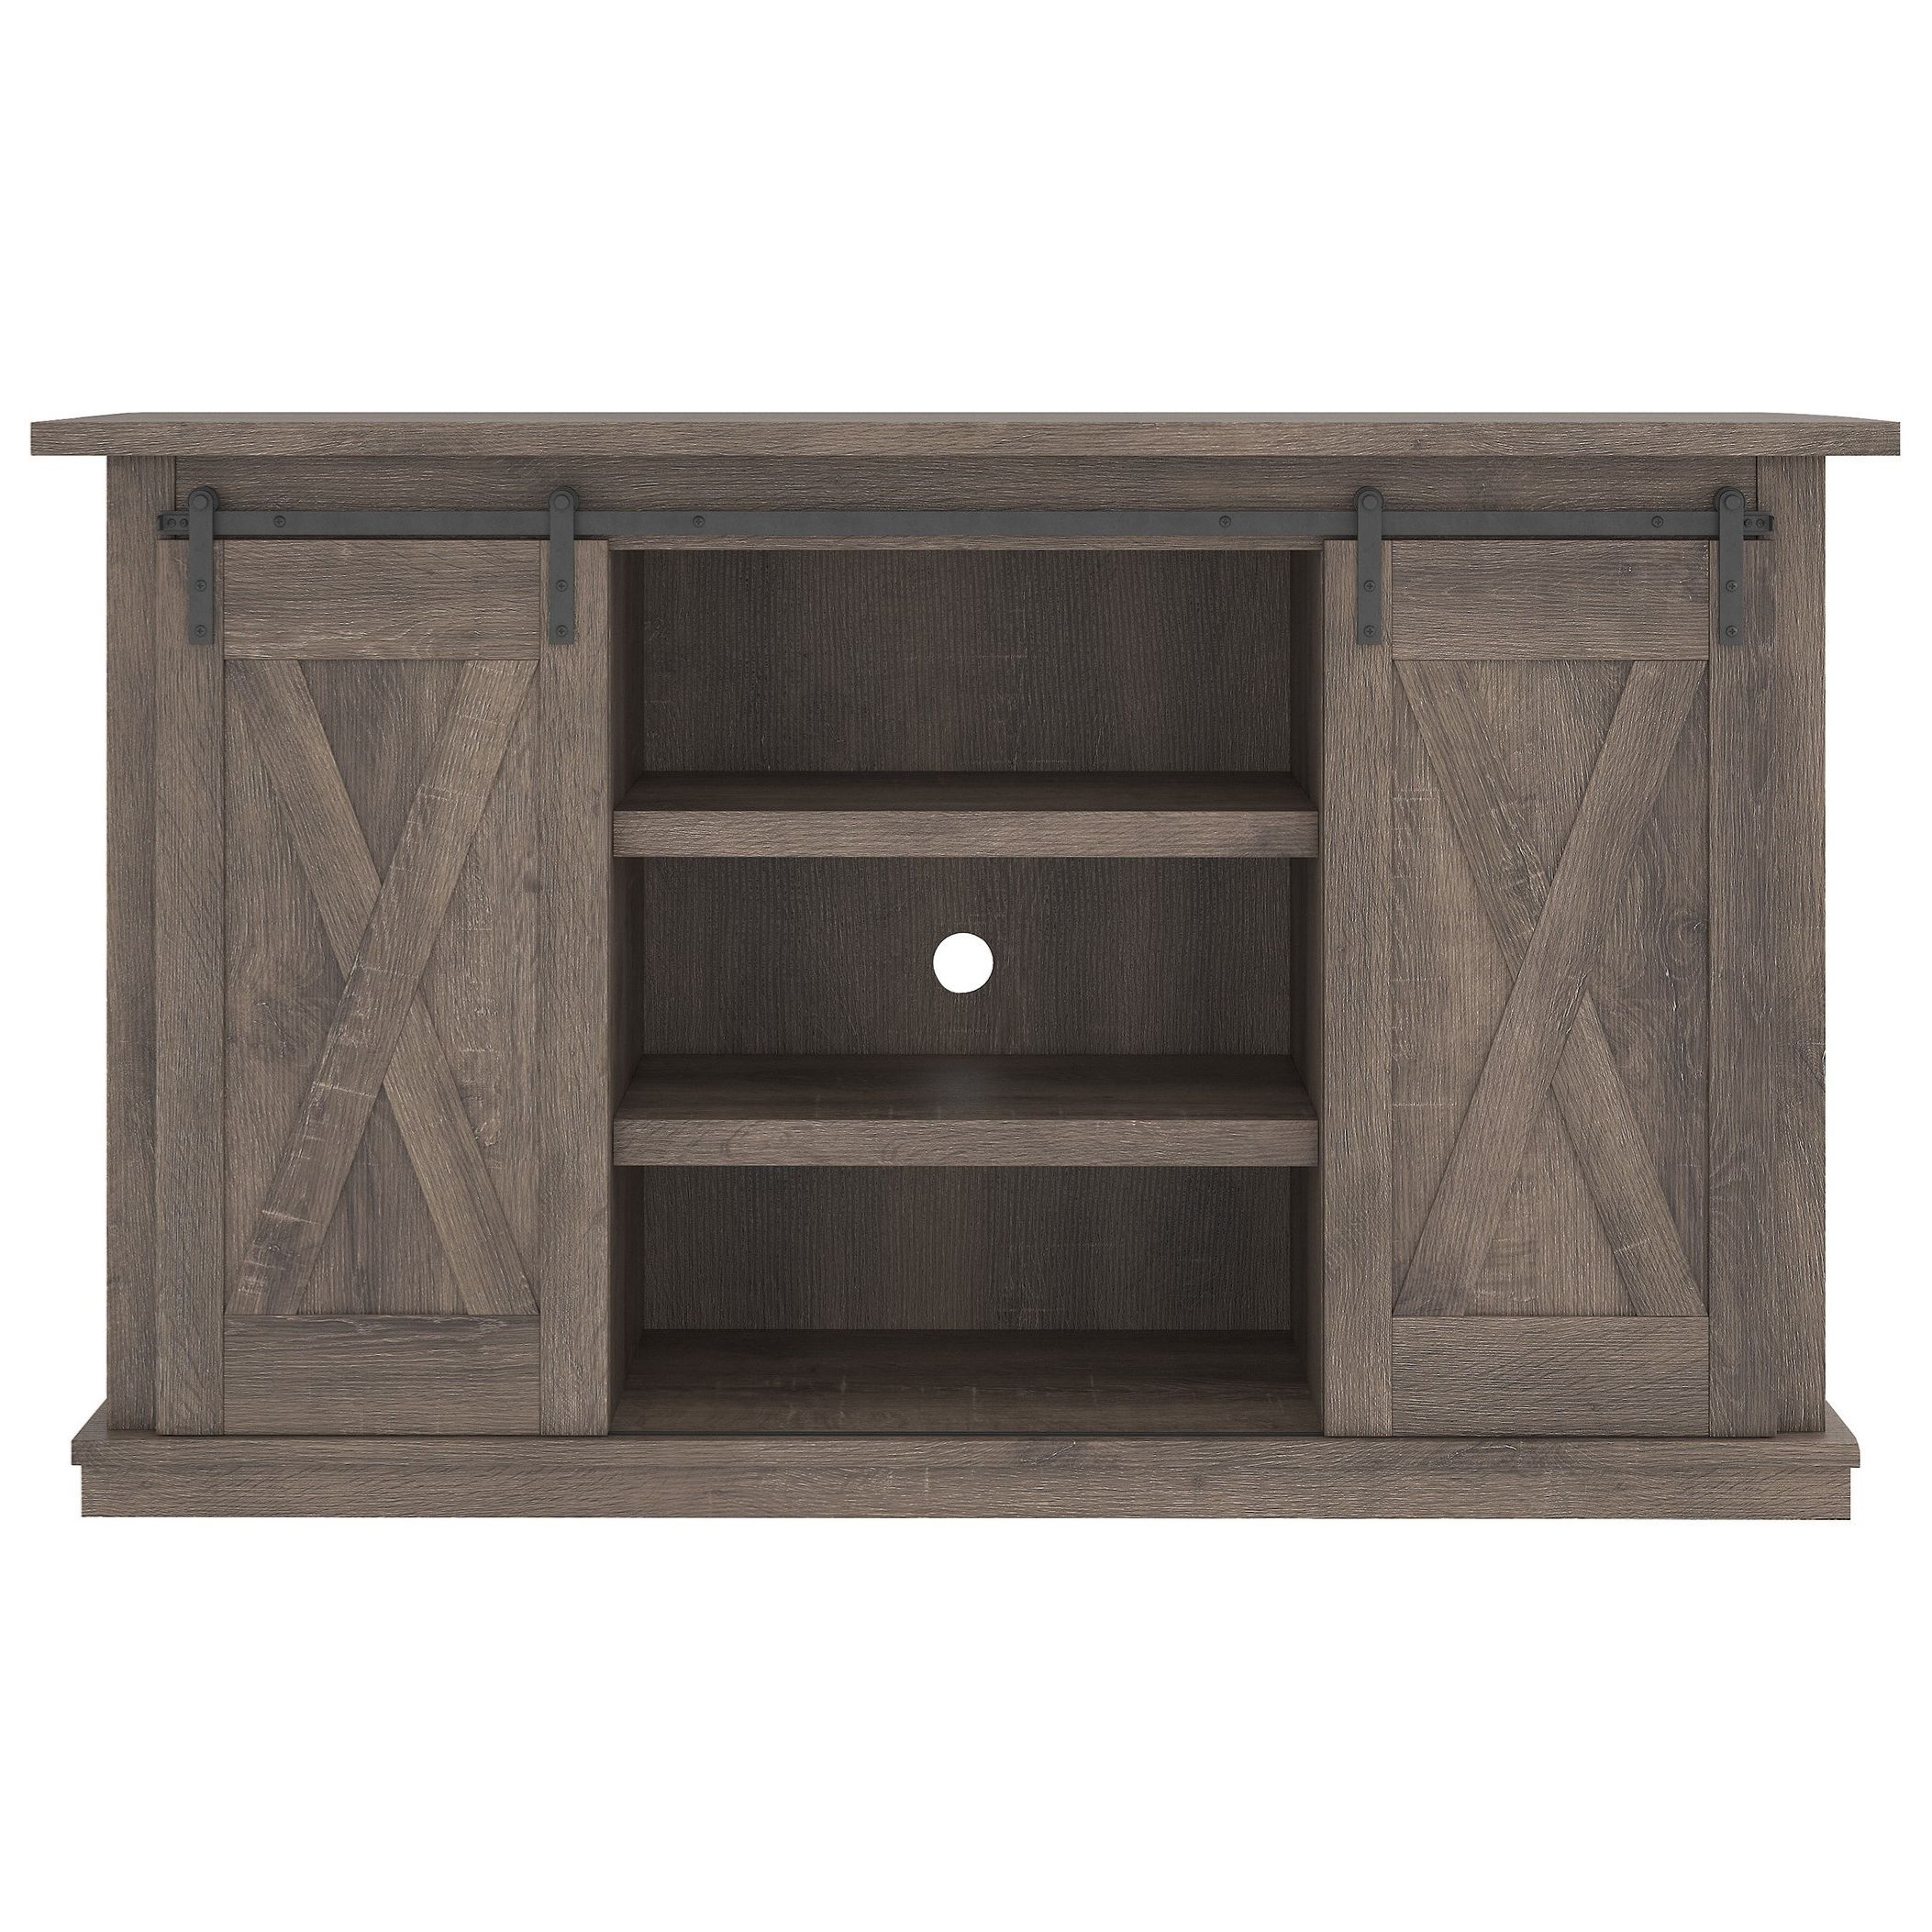 Newest Medium Tv Stands Inside Amaya Farmhouse Style Medium Tv Stand With Barn Doors (View 2 of 10)